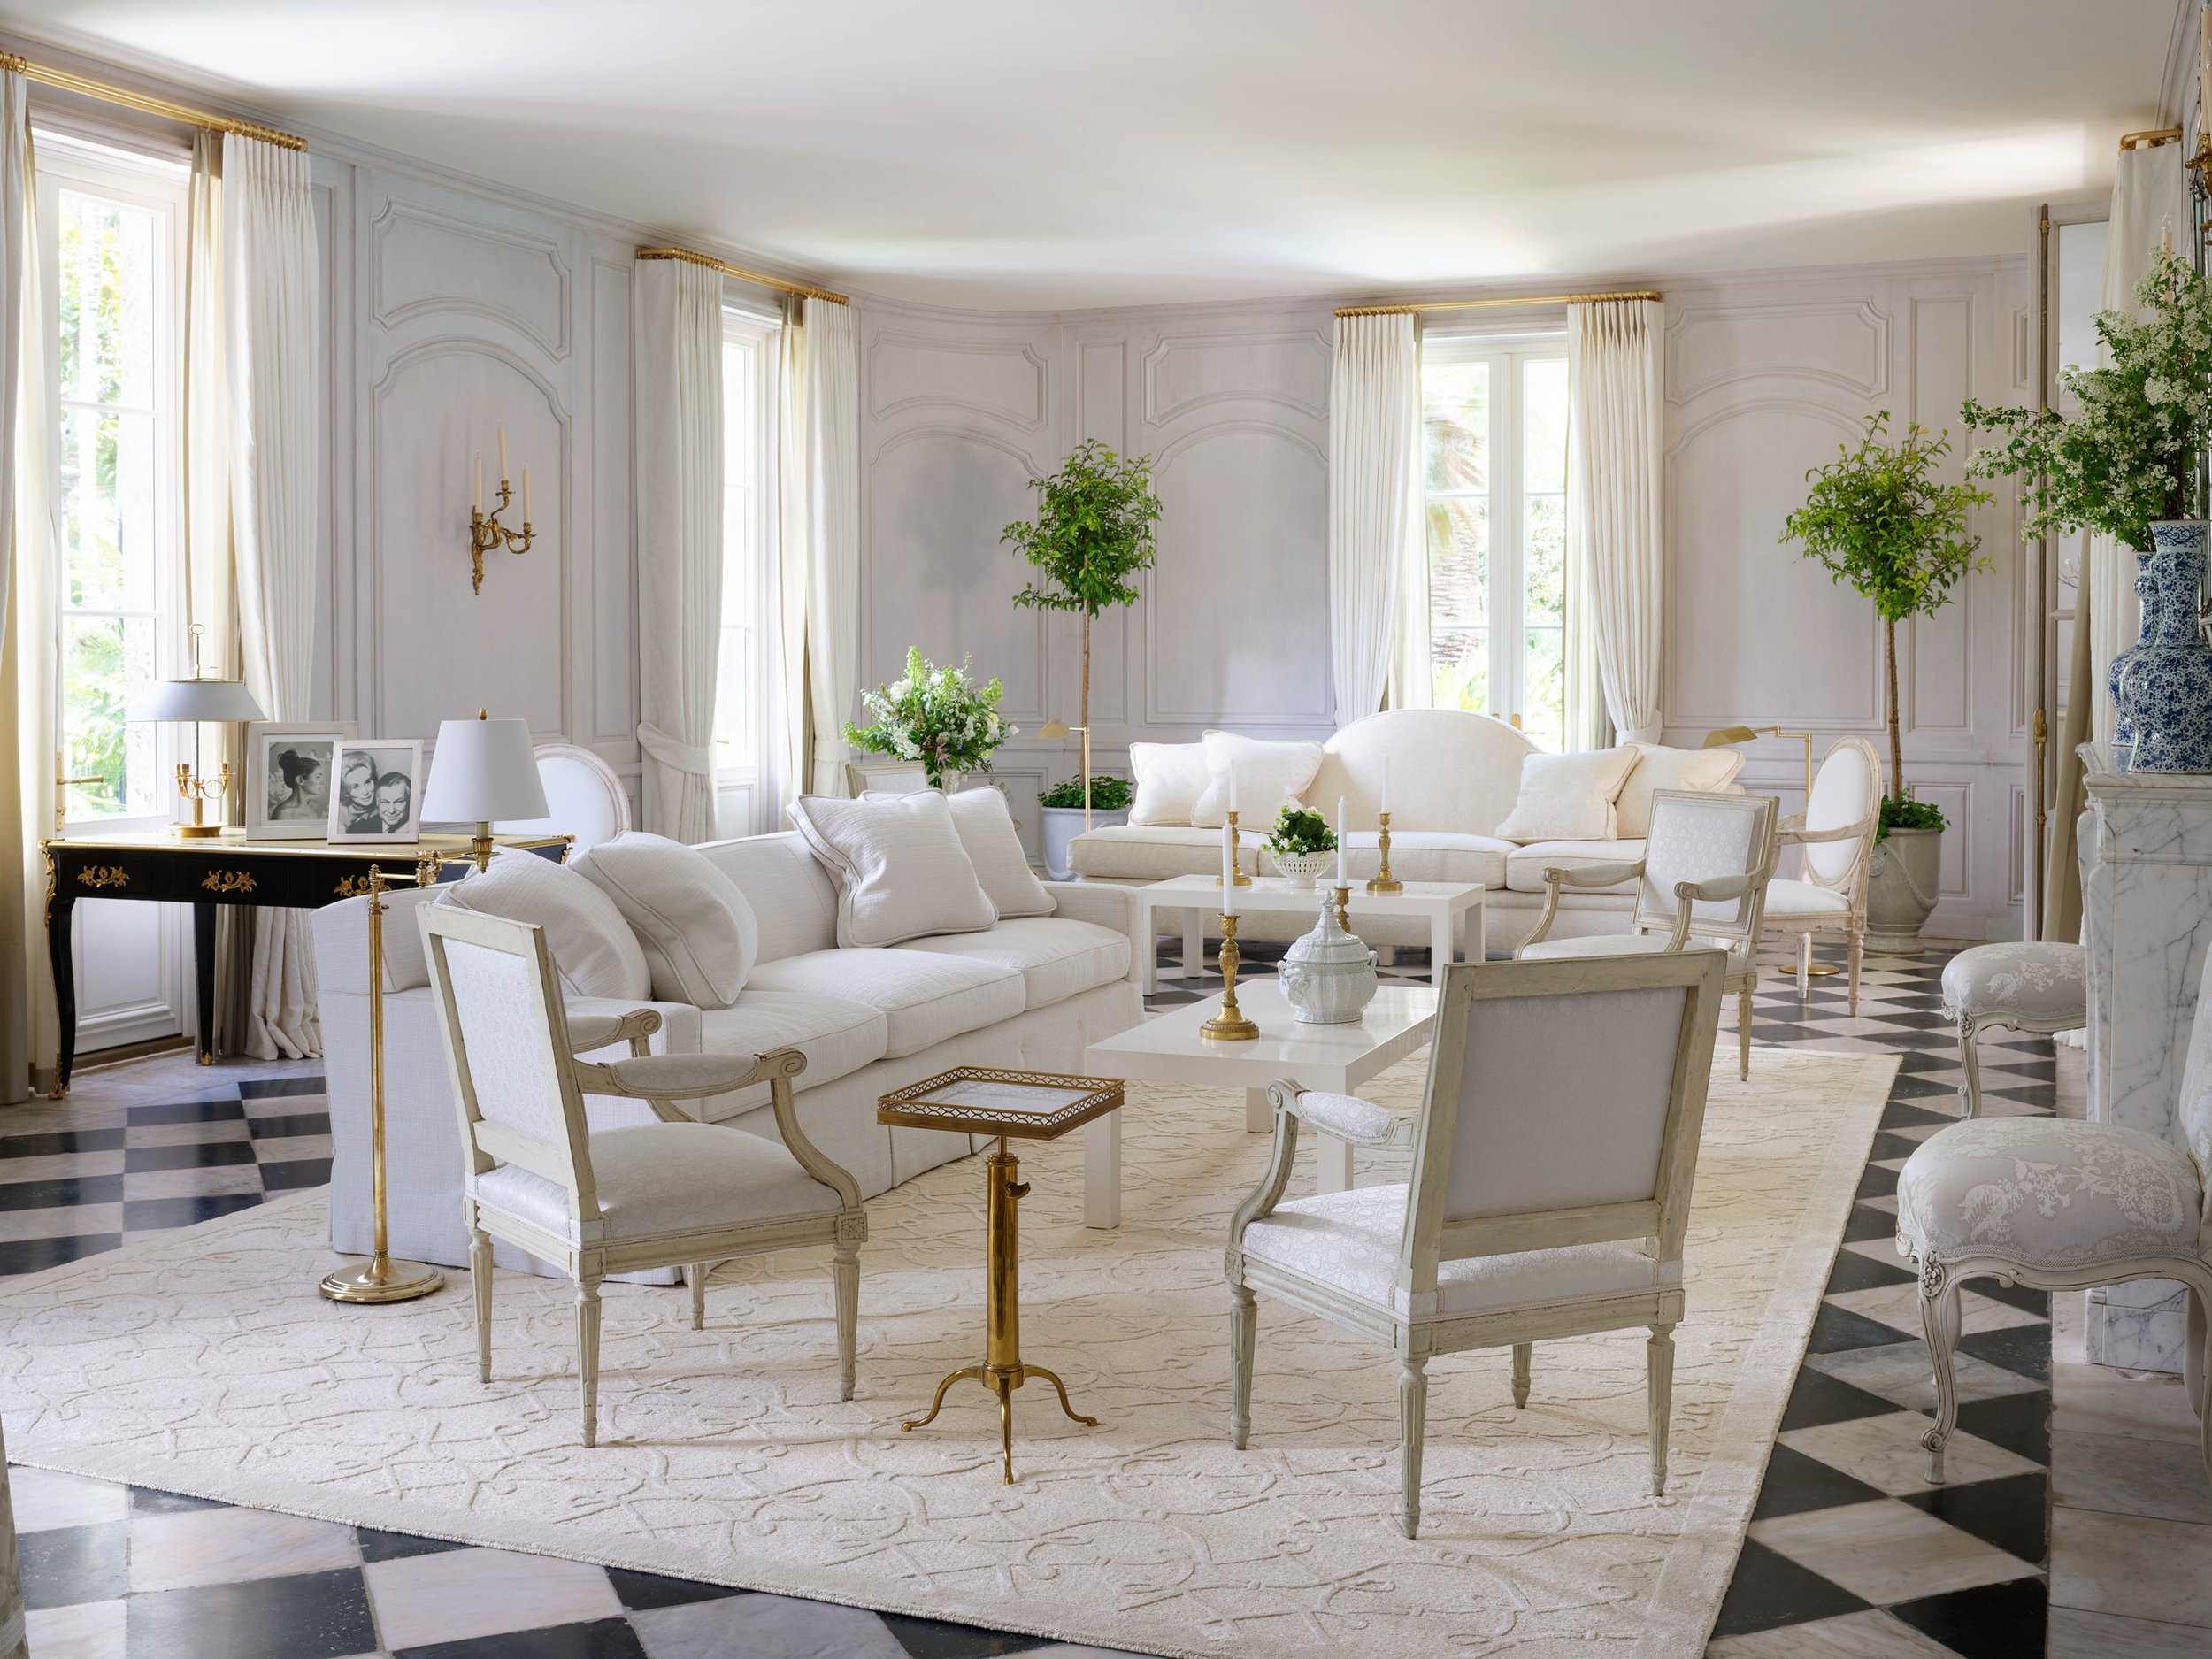  It's well evidenced that I have long been an admirer of Aerin Lauder, her company and just about everything she creates. I love her sense of style, so when AD published photos on her recently renovated Palm Beach home, I was over the moon. As a desi